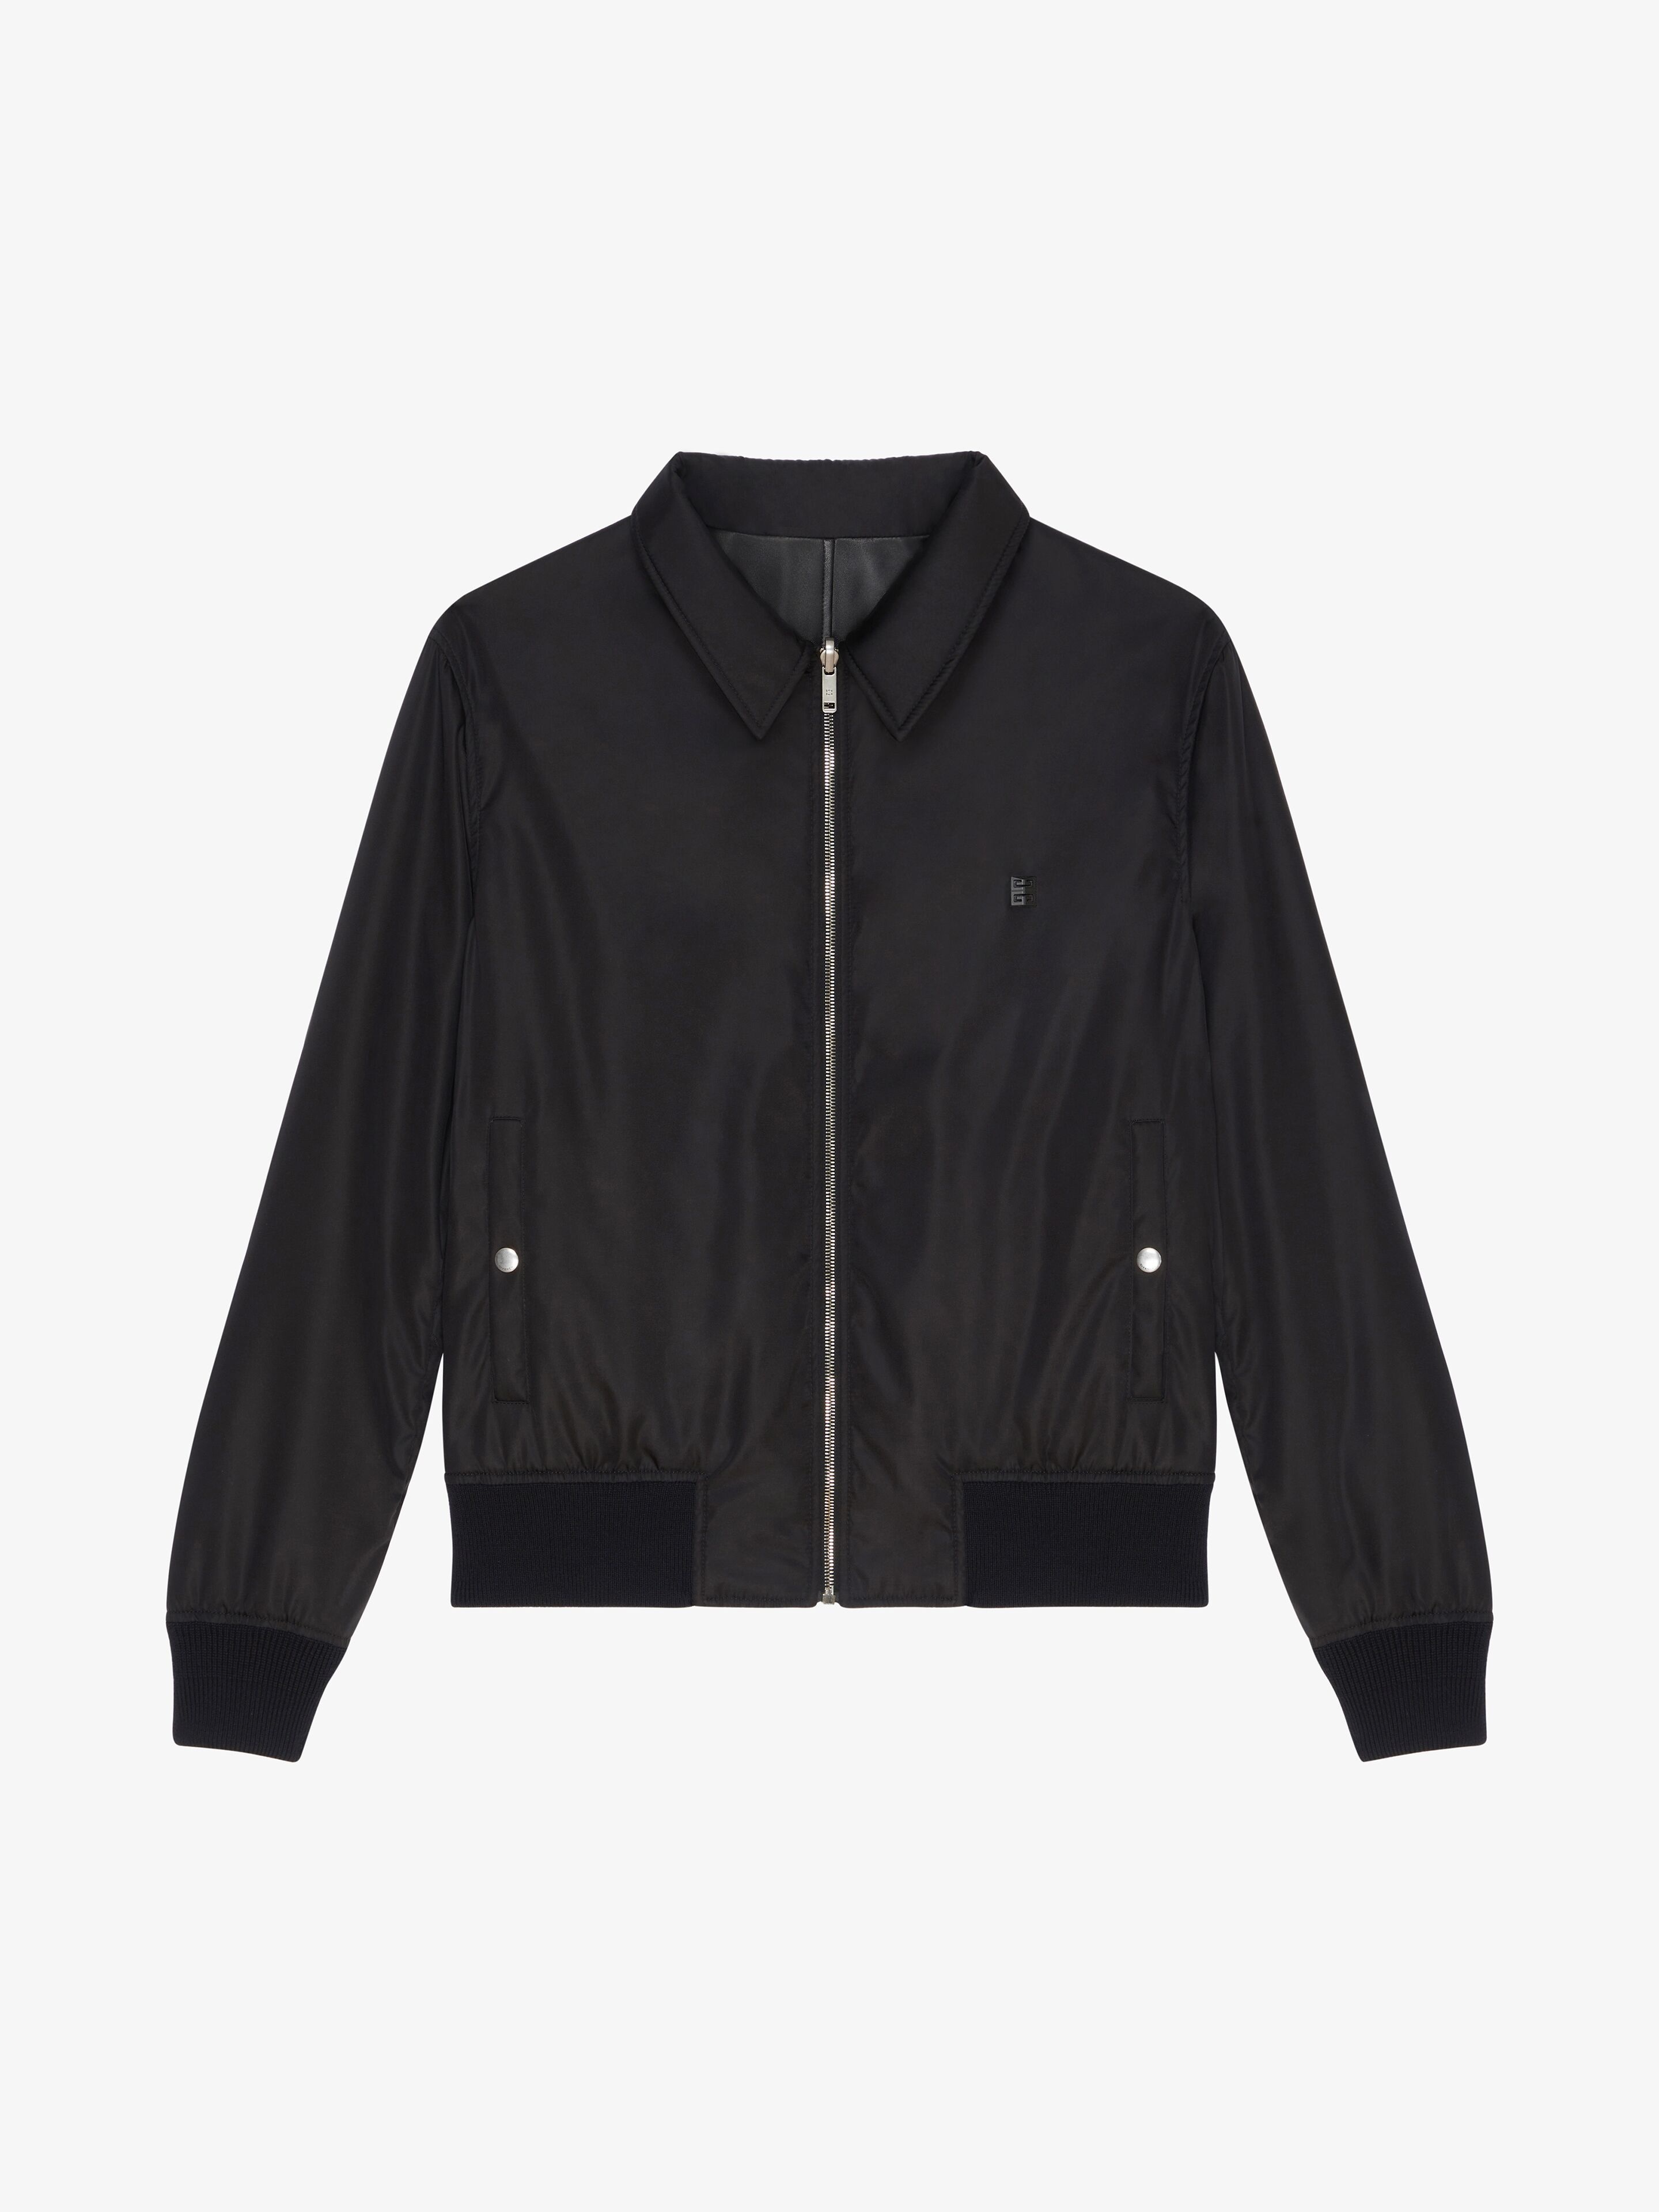 REVERSIBLE BOMBER JACKET IN LEATHER - 5